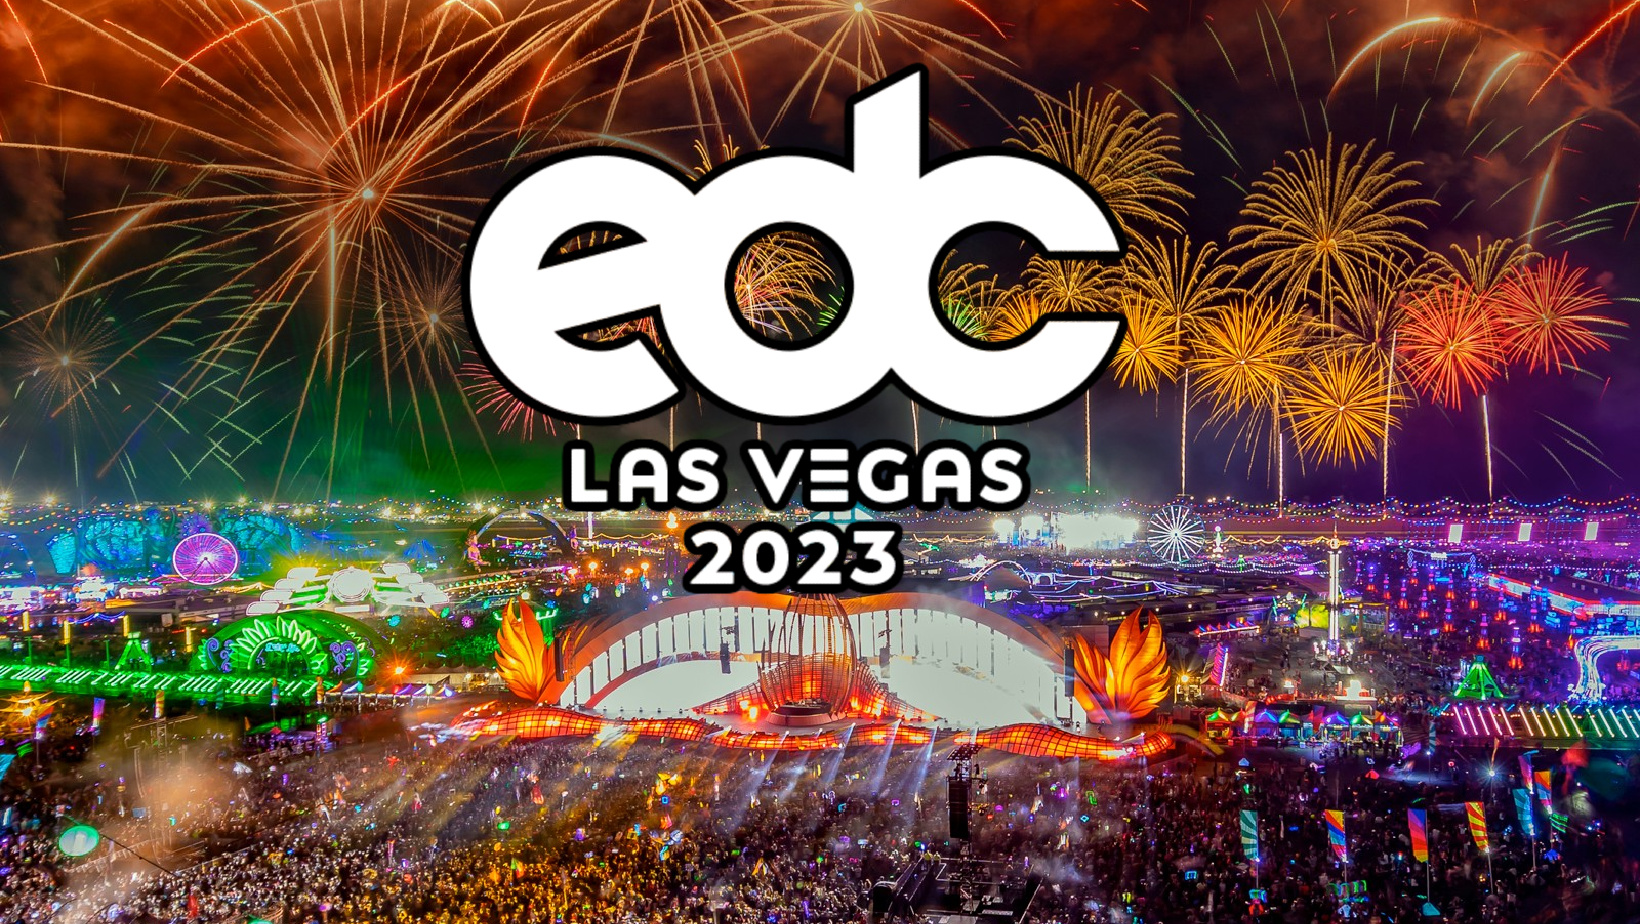 Limited EDC Sunday Single Day Tickets Announced